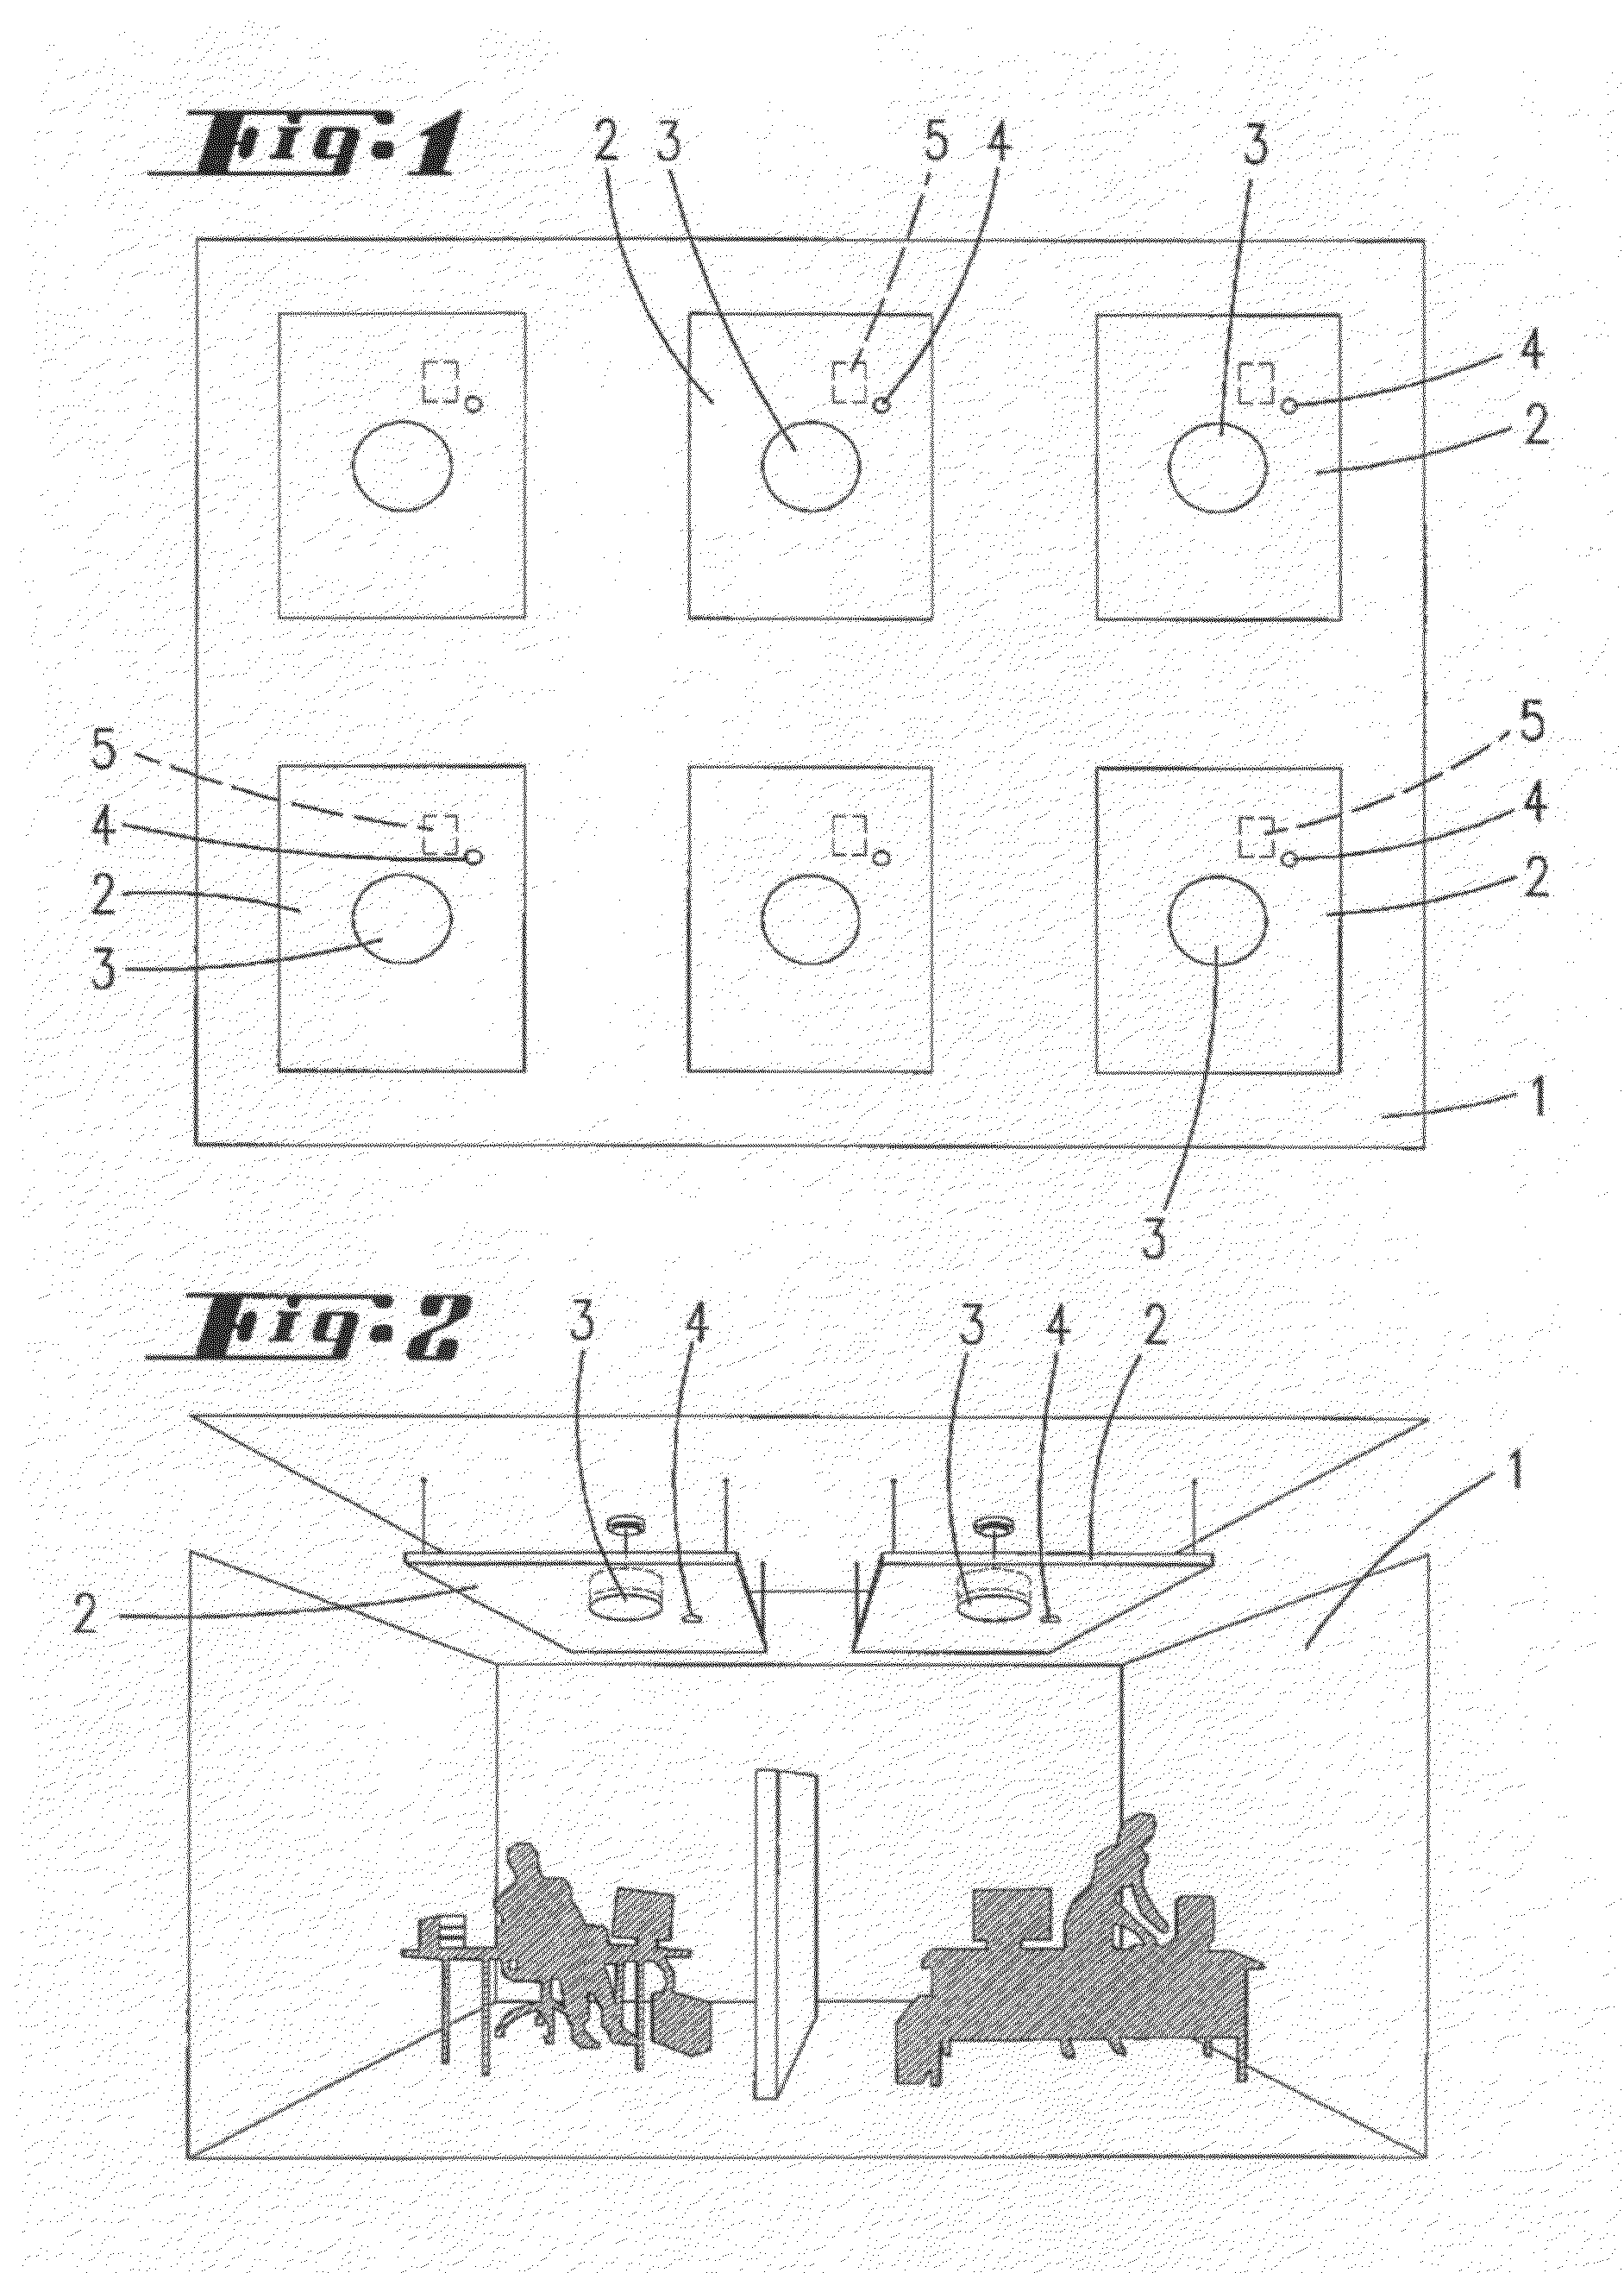 Method and apparatus for active sound masking